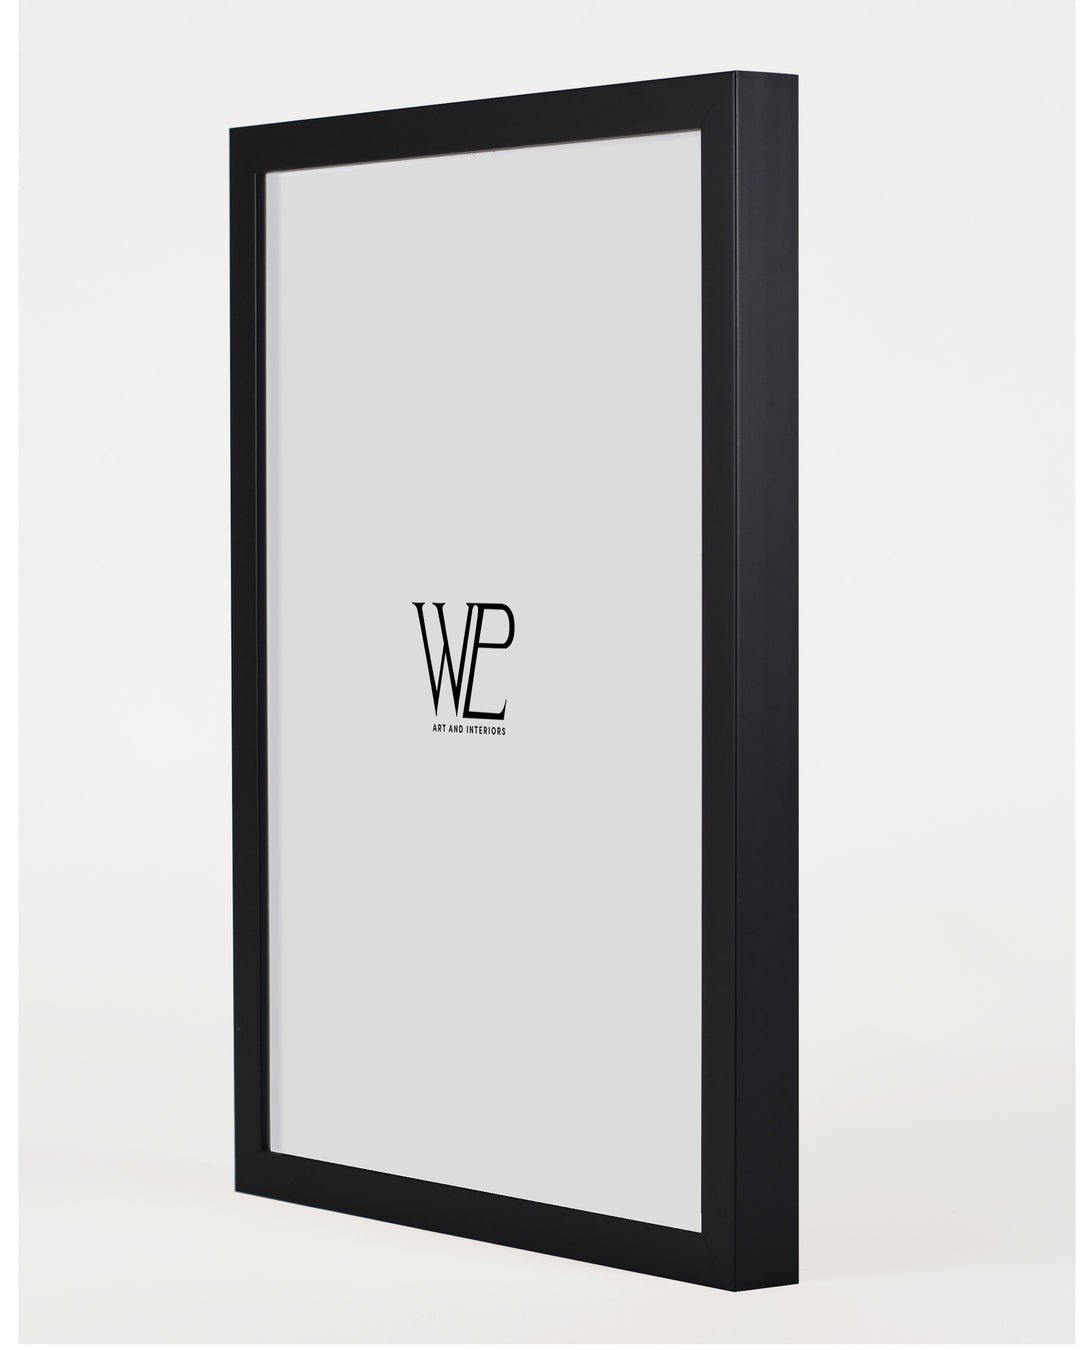 Black Picture Frame (Wood Grain), A5 Size Photo Frame